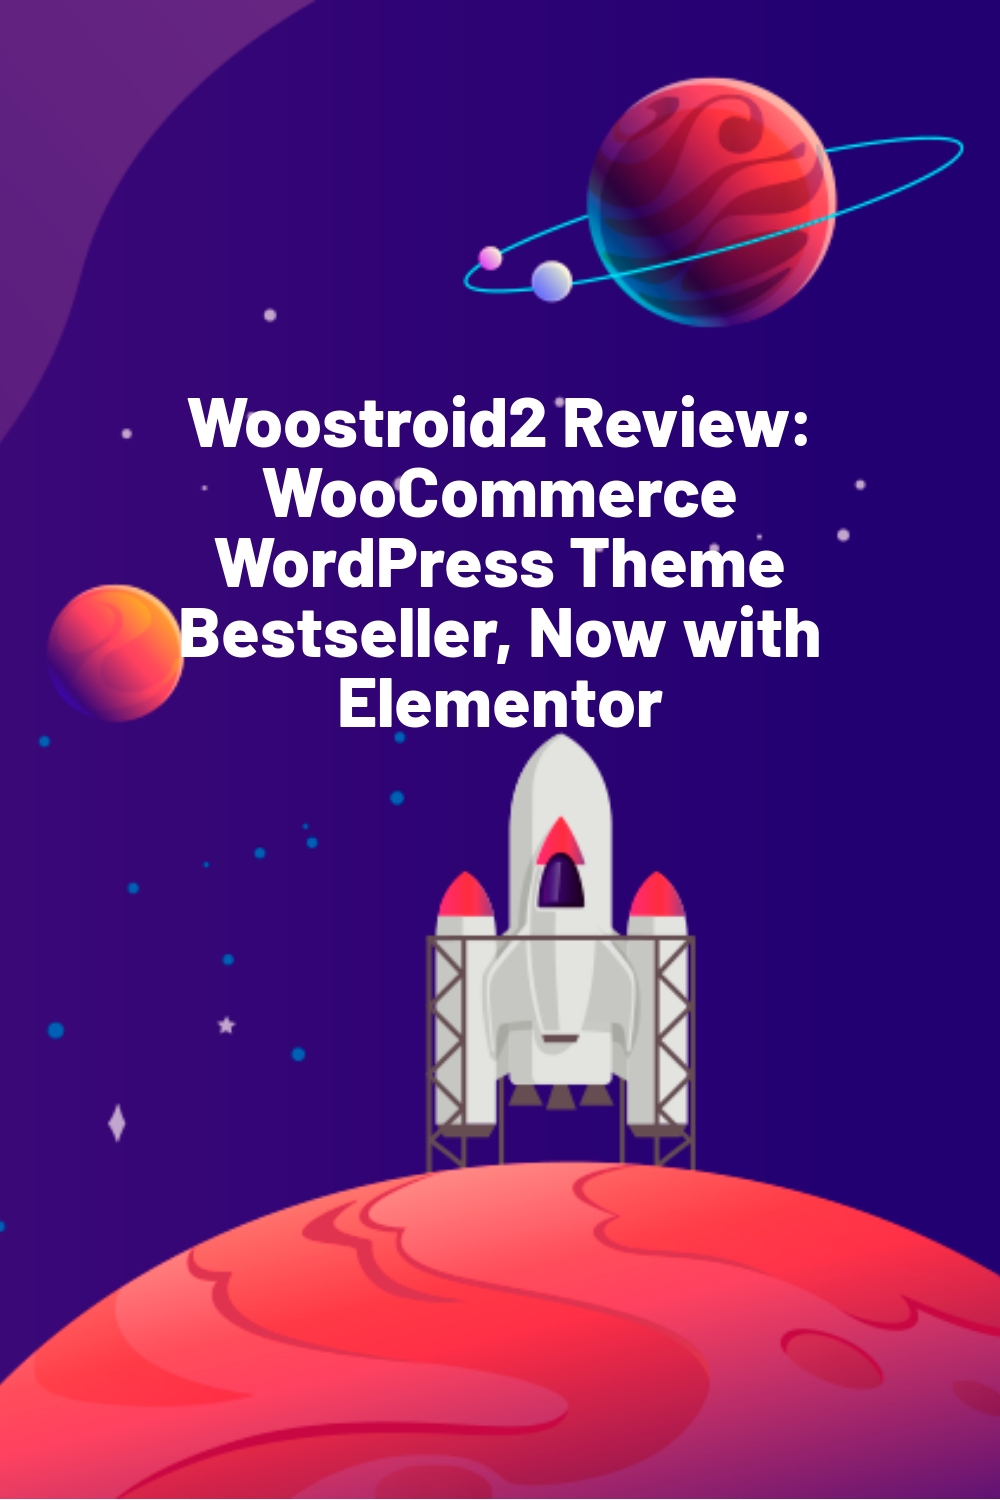 Woostroid2 Review: WooCommerce WordPress Theme Bestseller, Now with Elementor